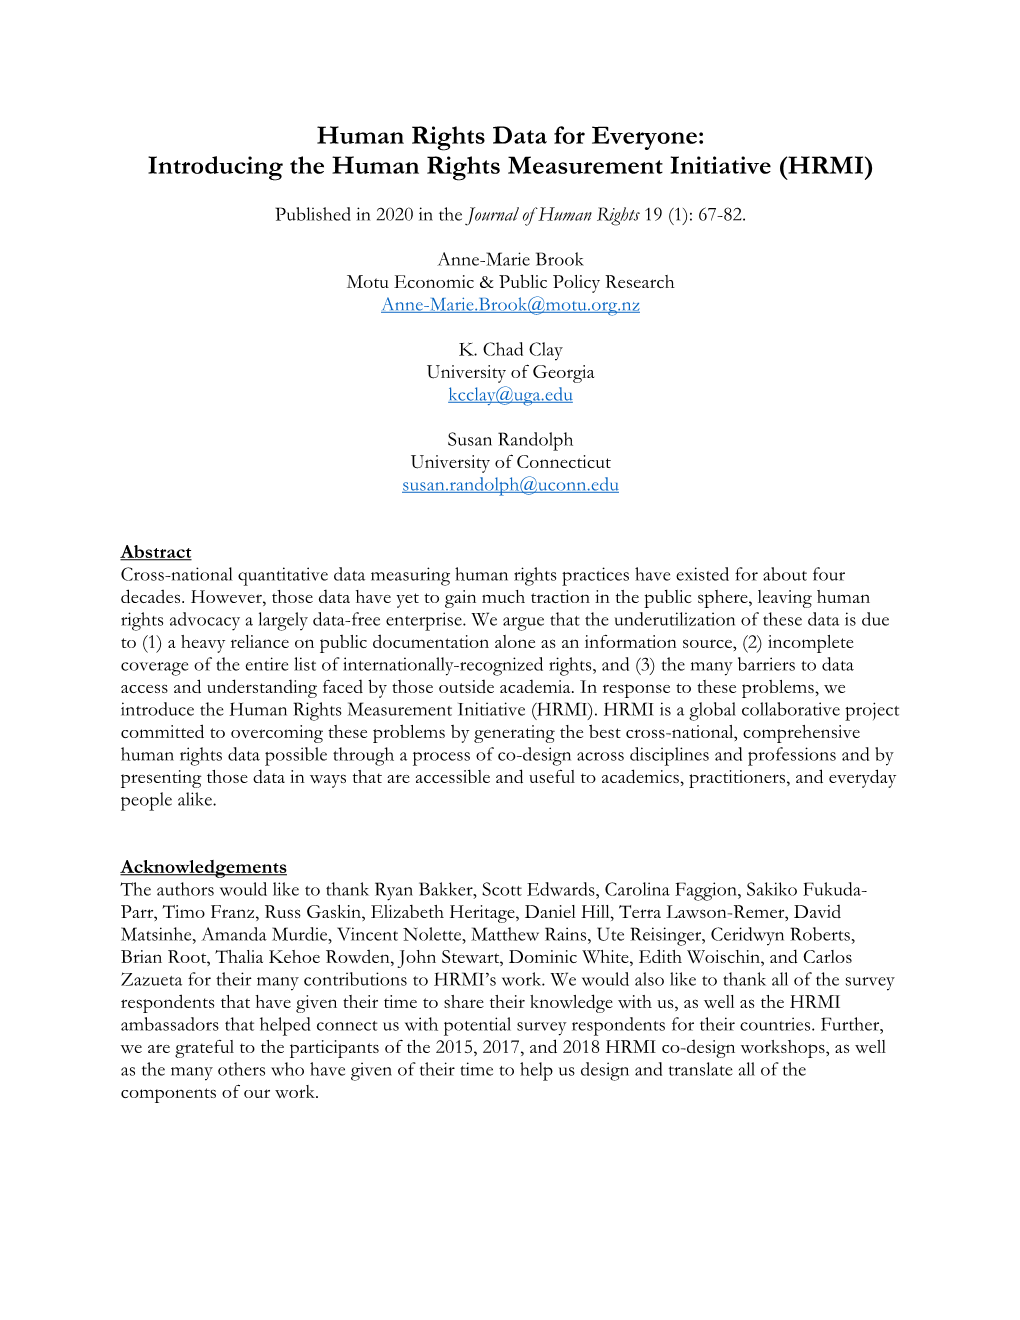 Introducing the Human Rights Measurement Initiative (HRMI)